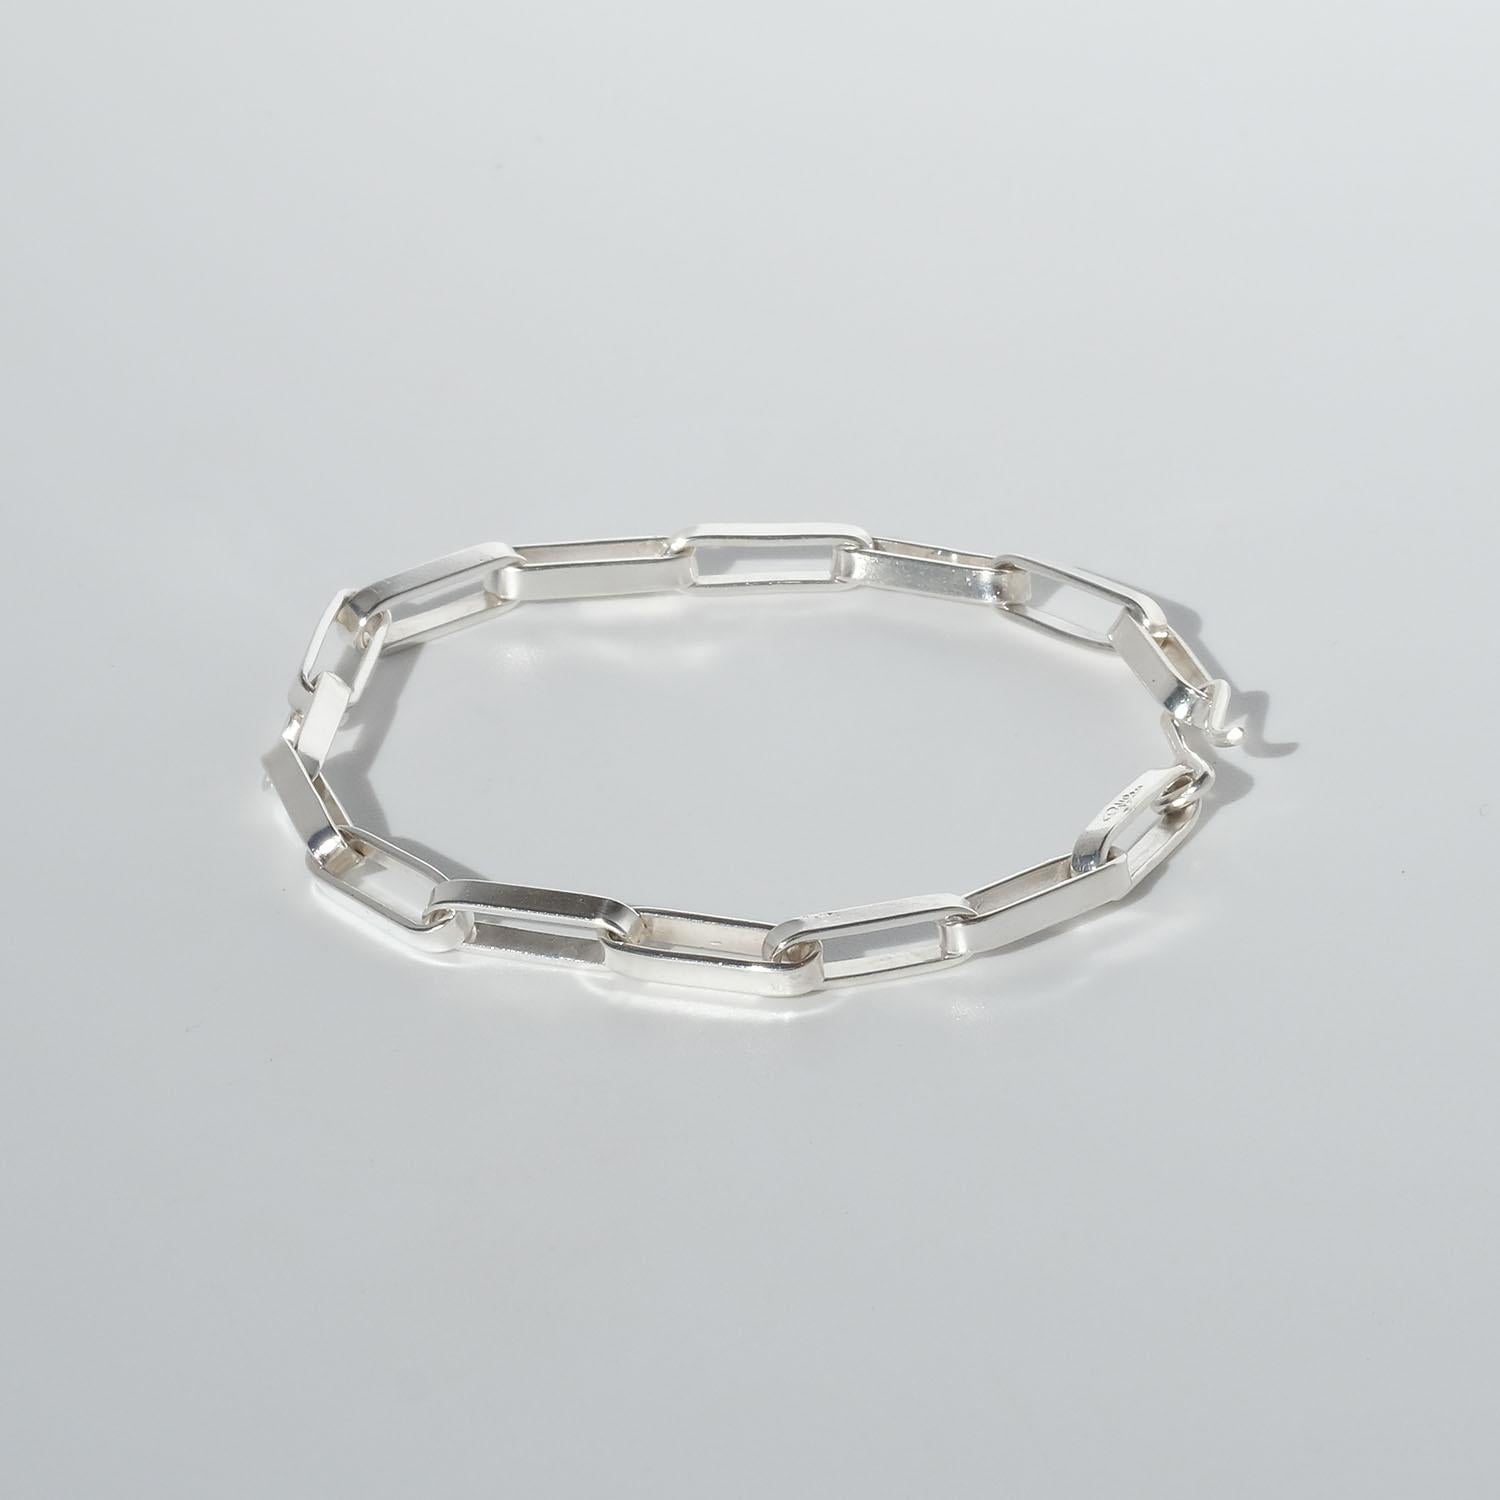 This sterling silver chain bracelet is made of rectangular silver links which are linked together. The links have a glossy surface and the bracelet closes easily with a hook.

The chain has a sleek appearance with its geometric shaped links. This is